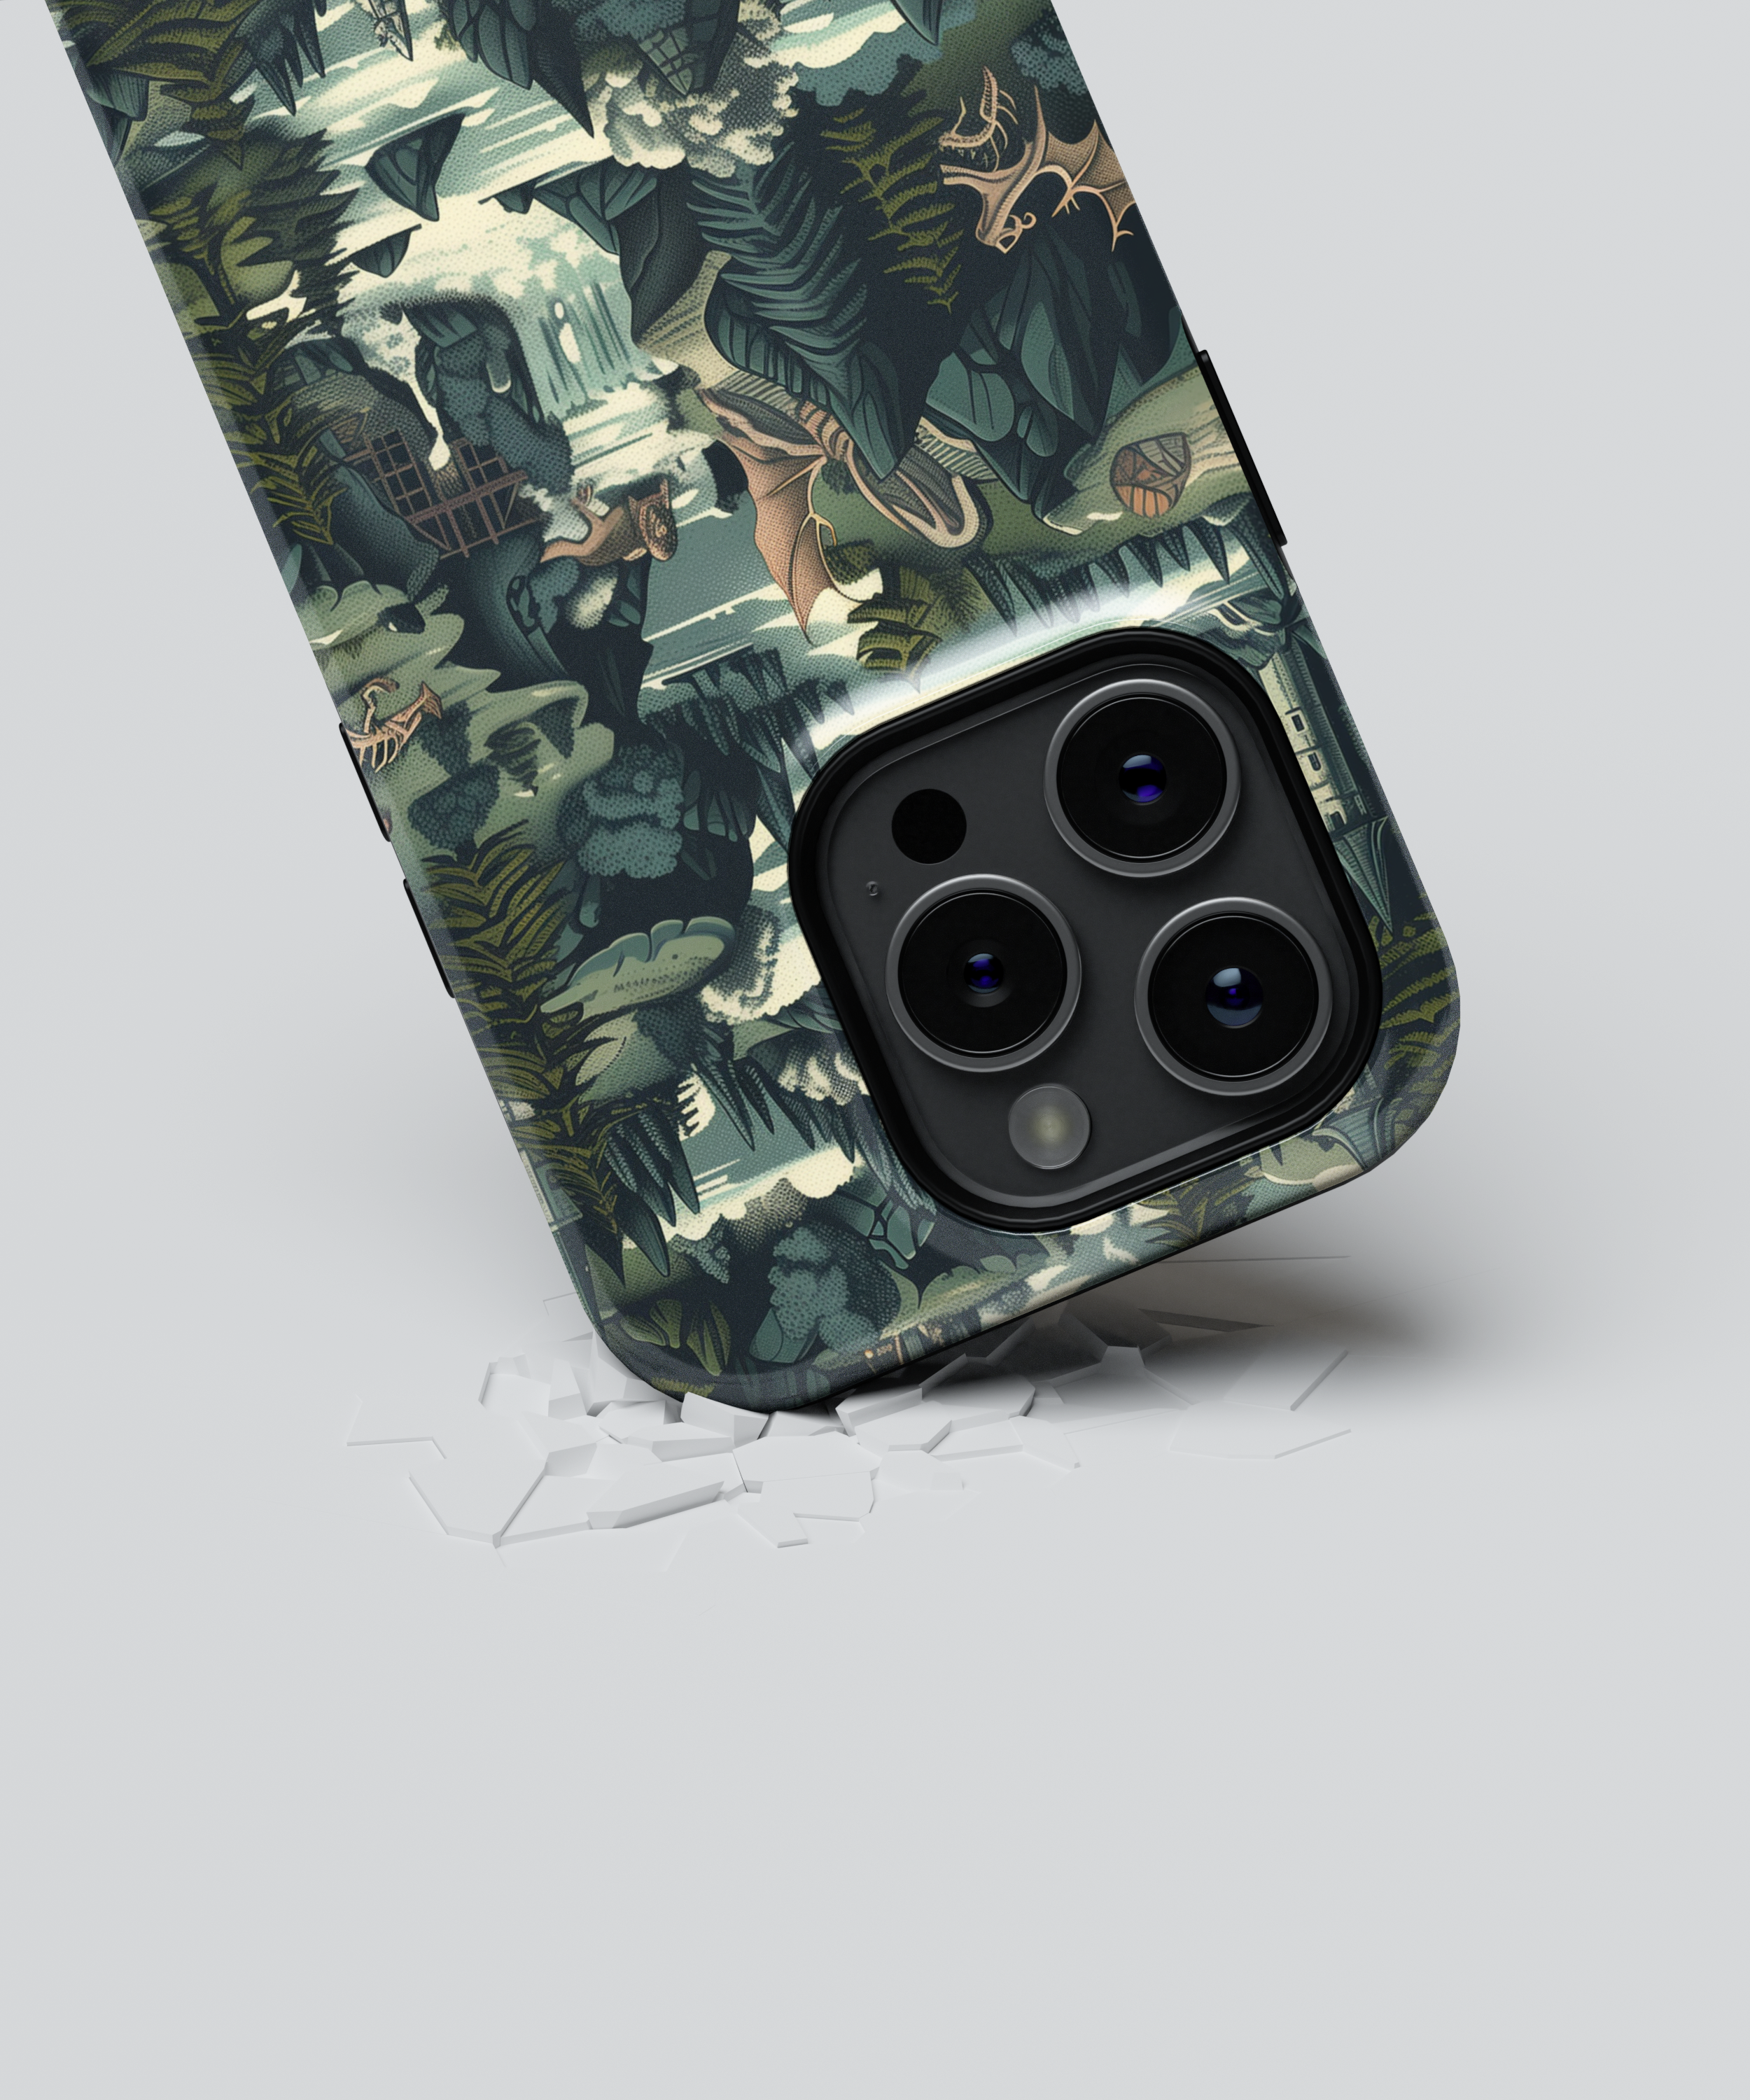 iPhone Tough Case with MagSafe - Mythical Kingdom Tapestry - CASETEROID